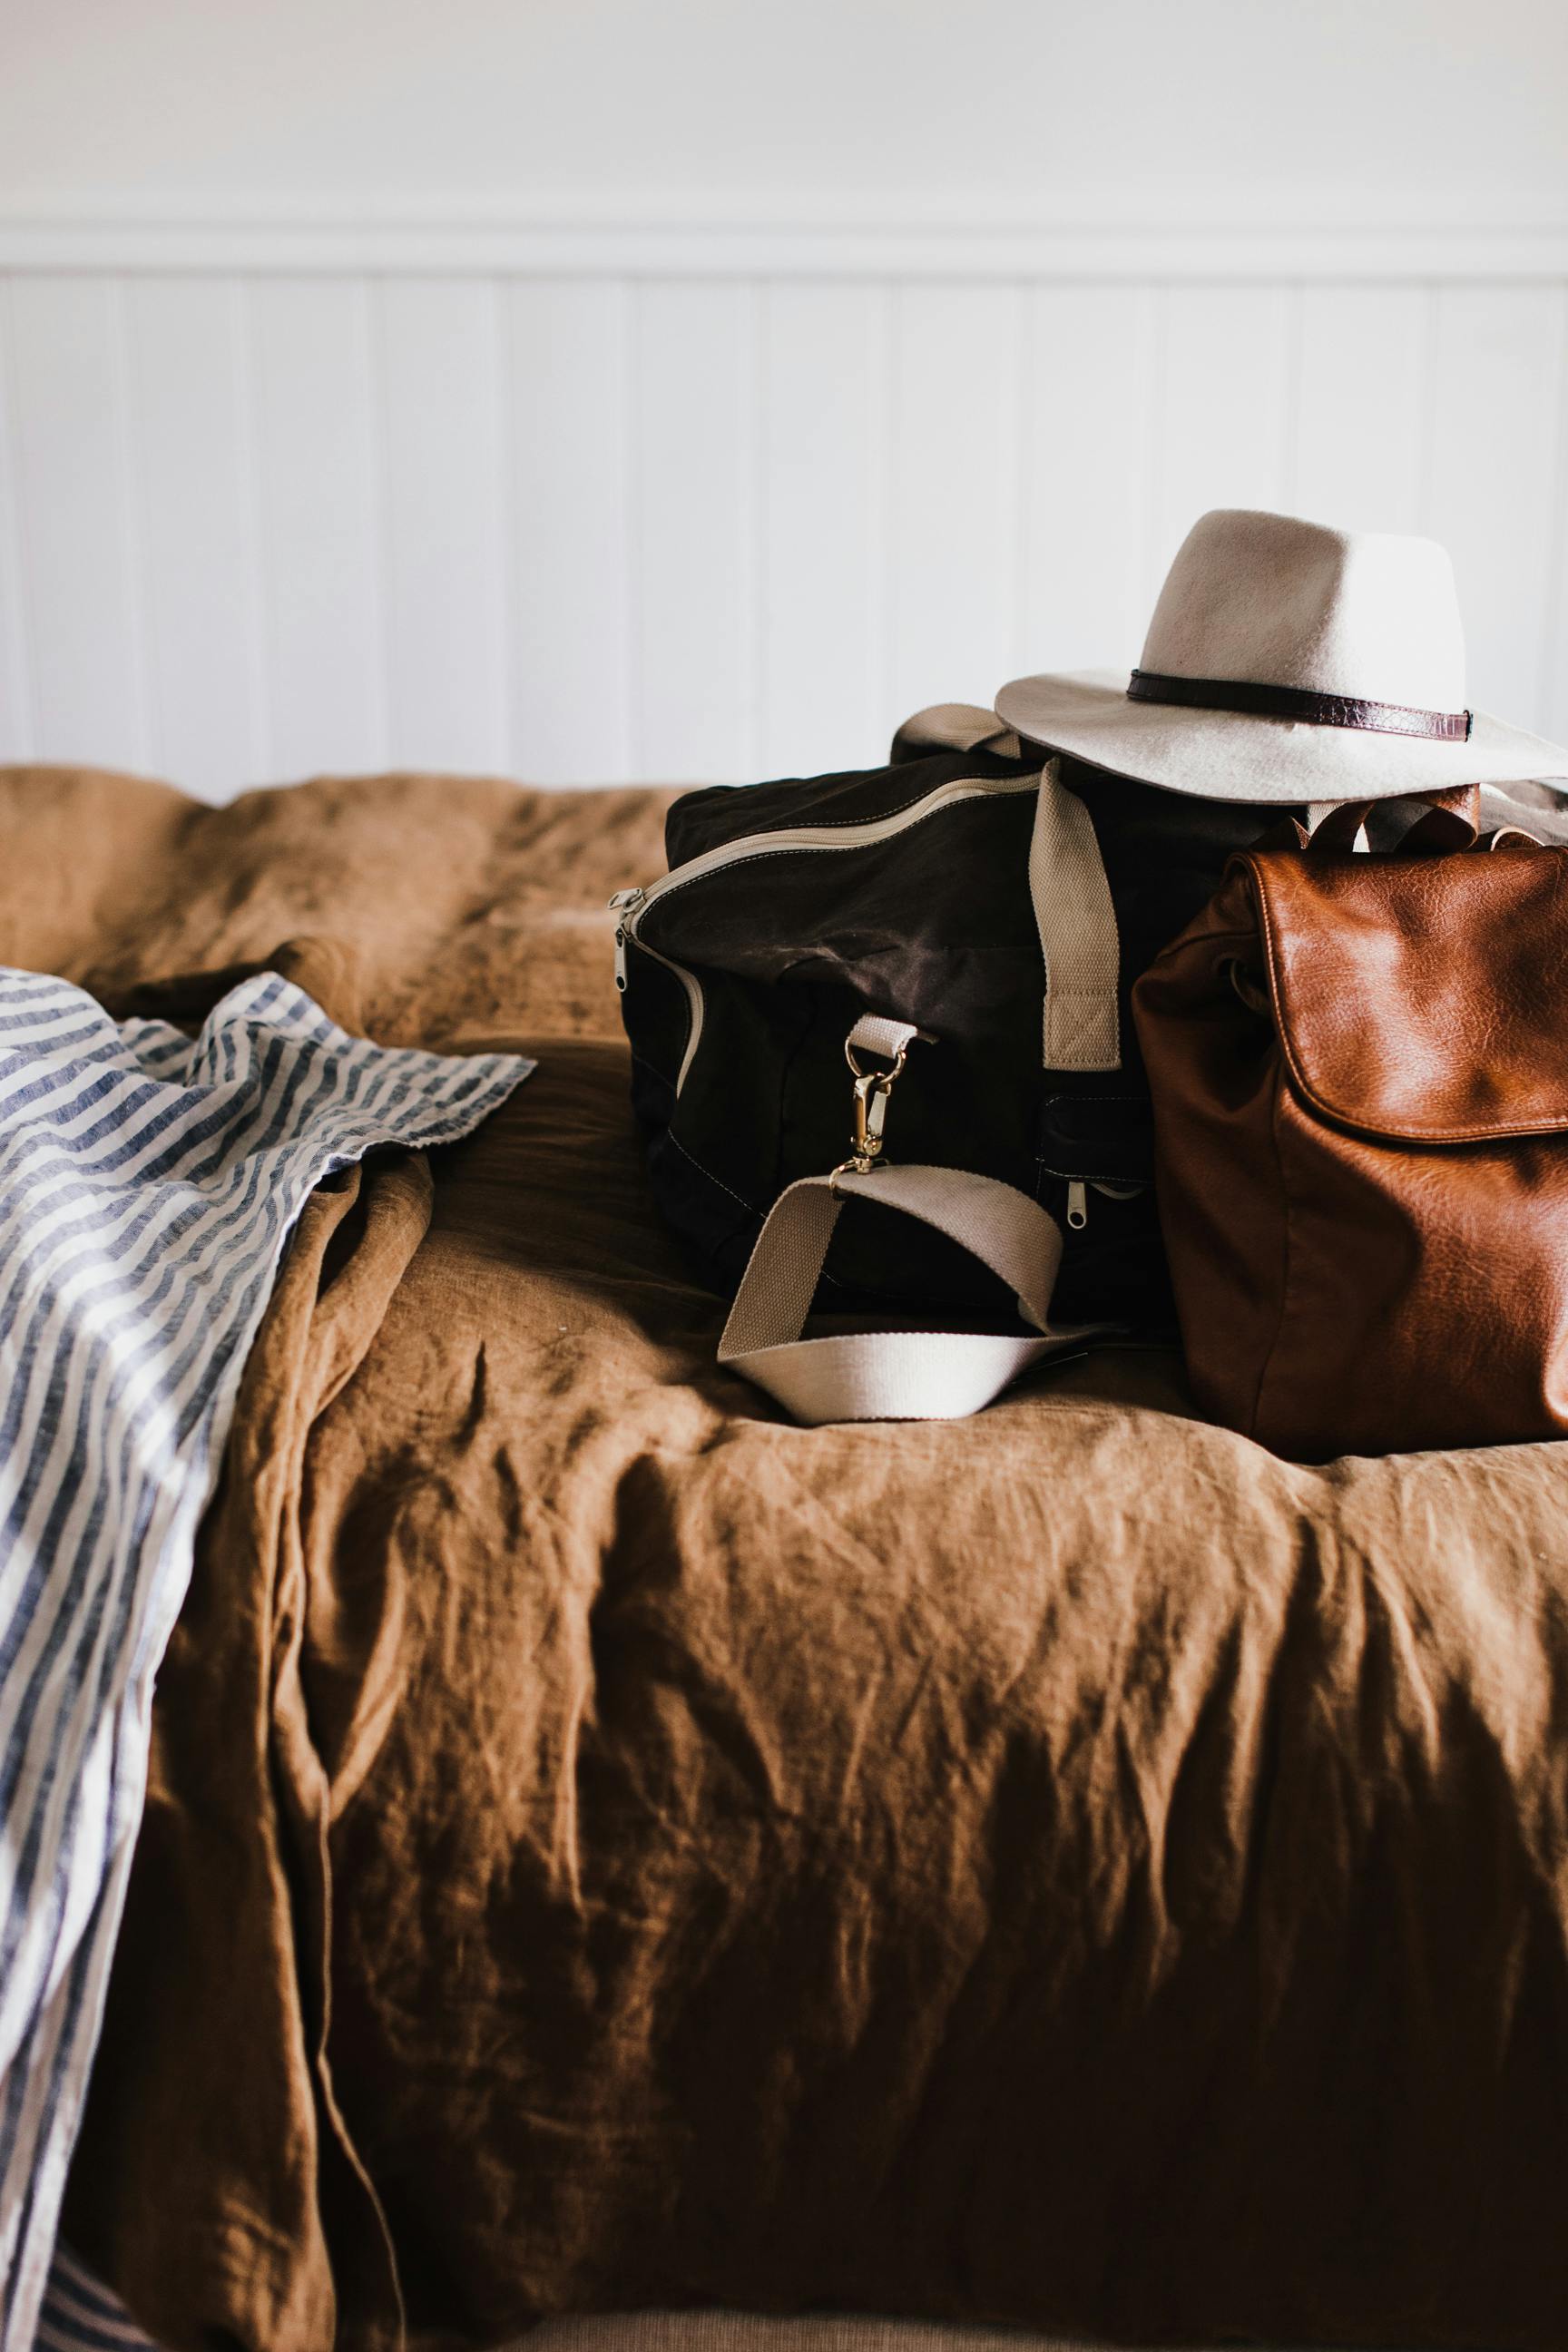 Travel bags on a bed | Source: Pexels